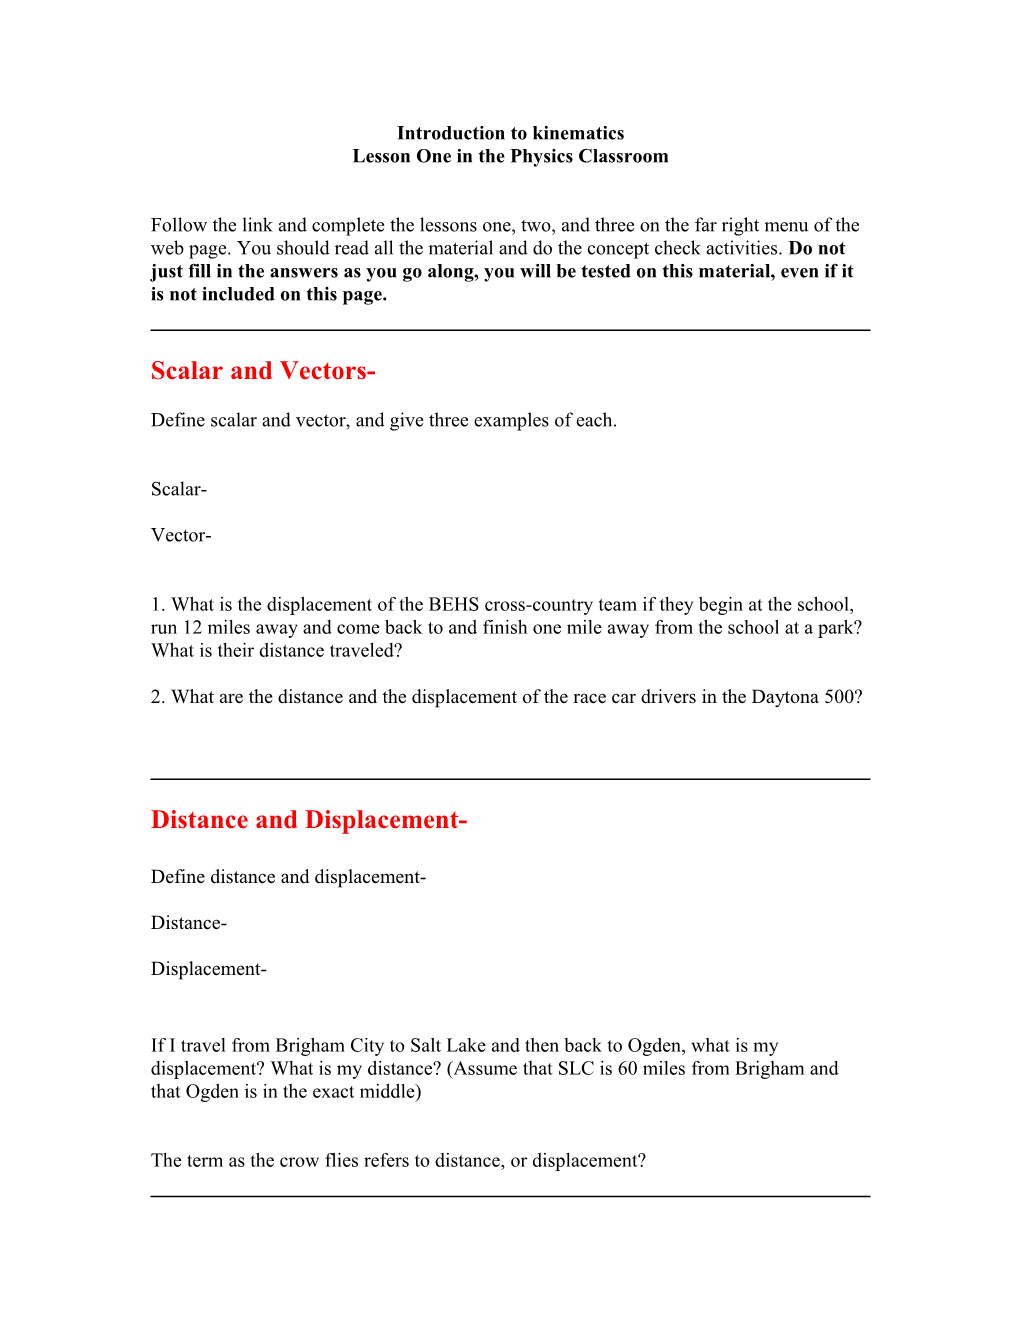 Use This Word Document to Complete the Assignment